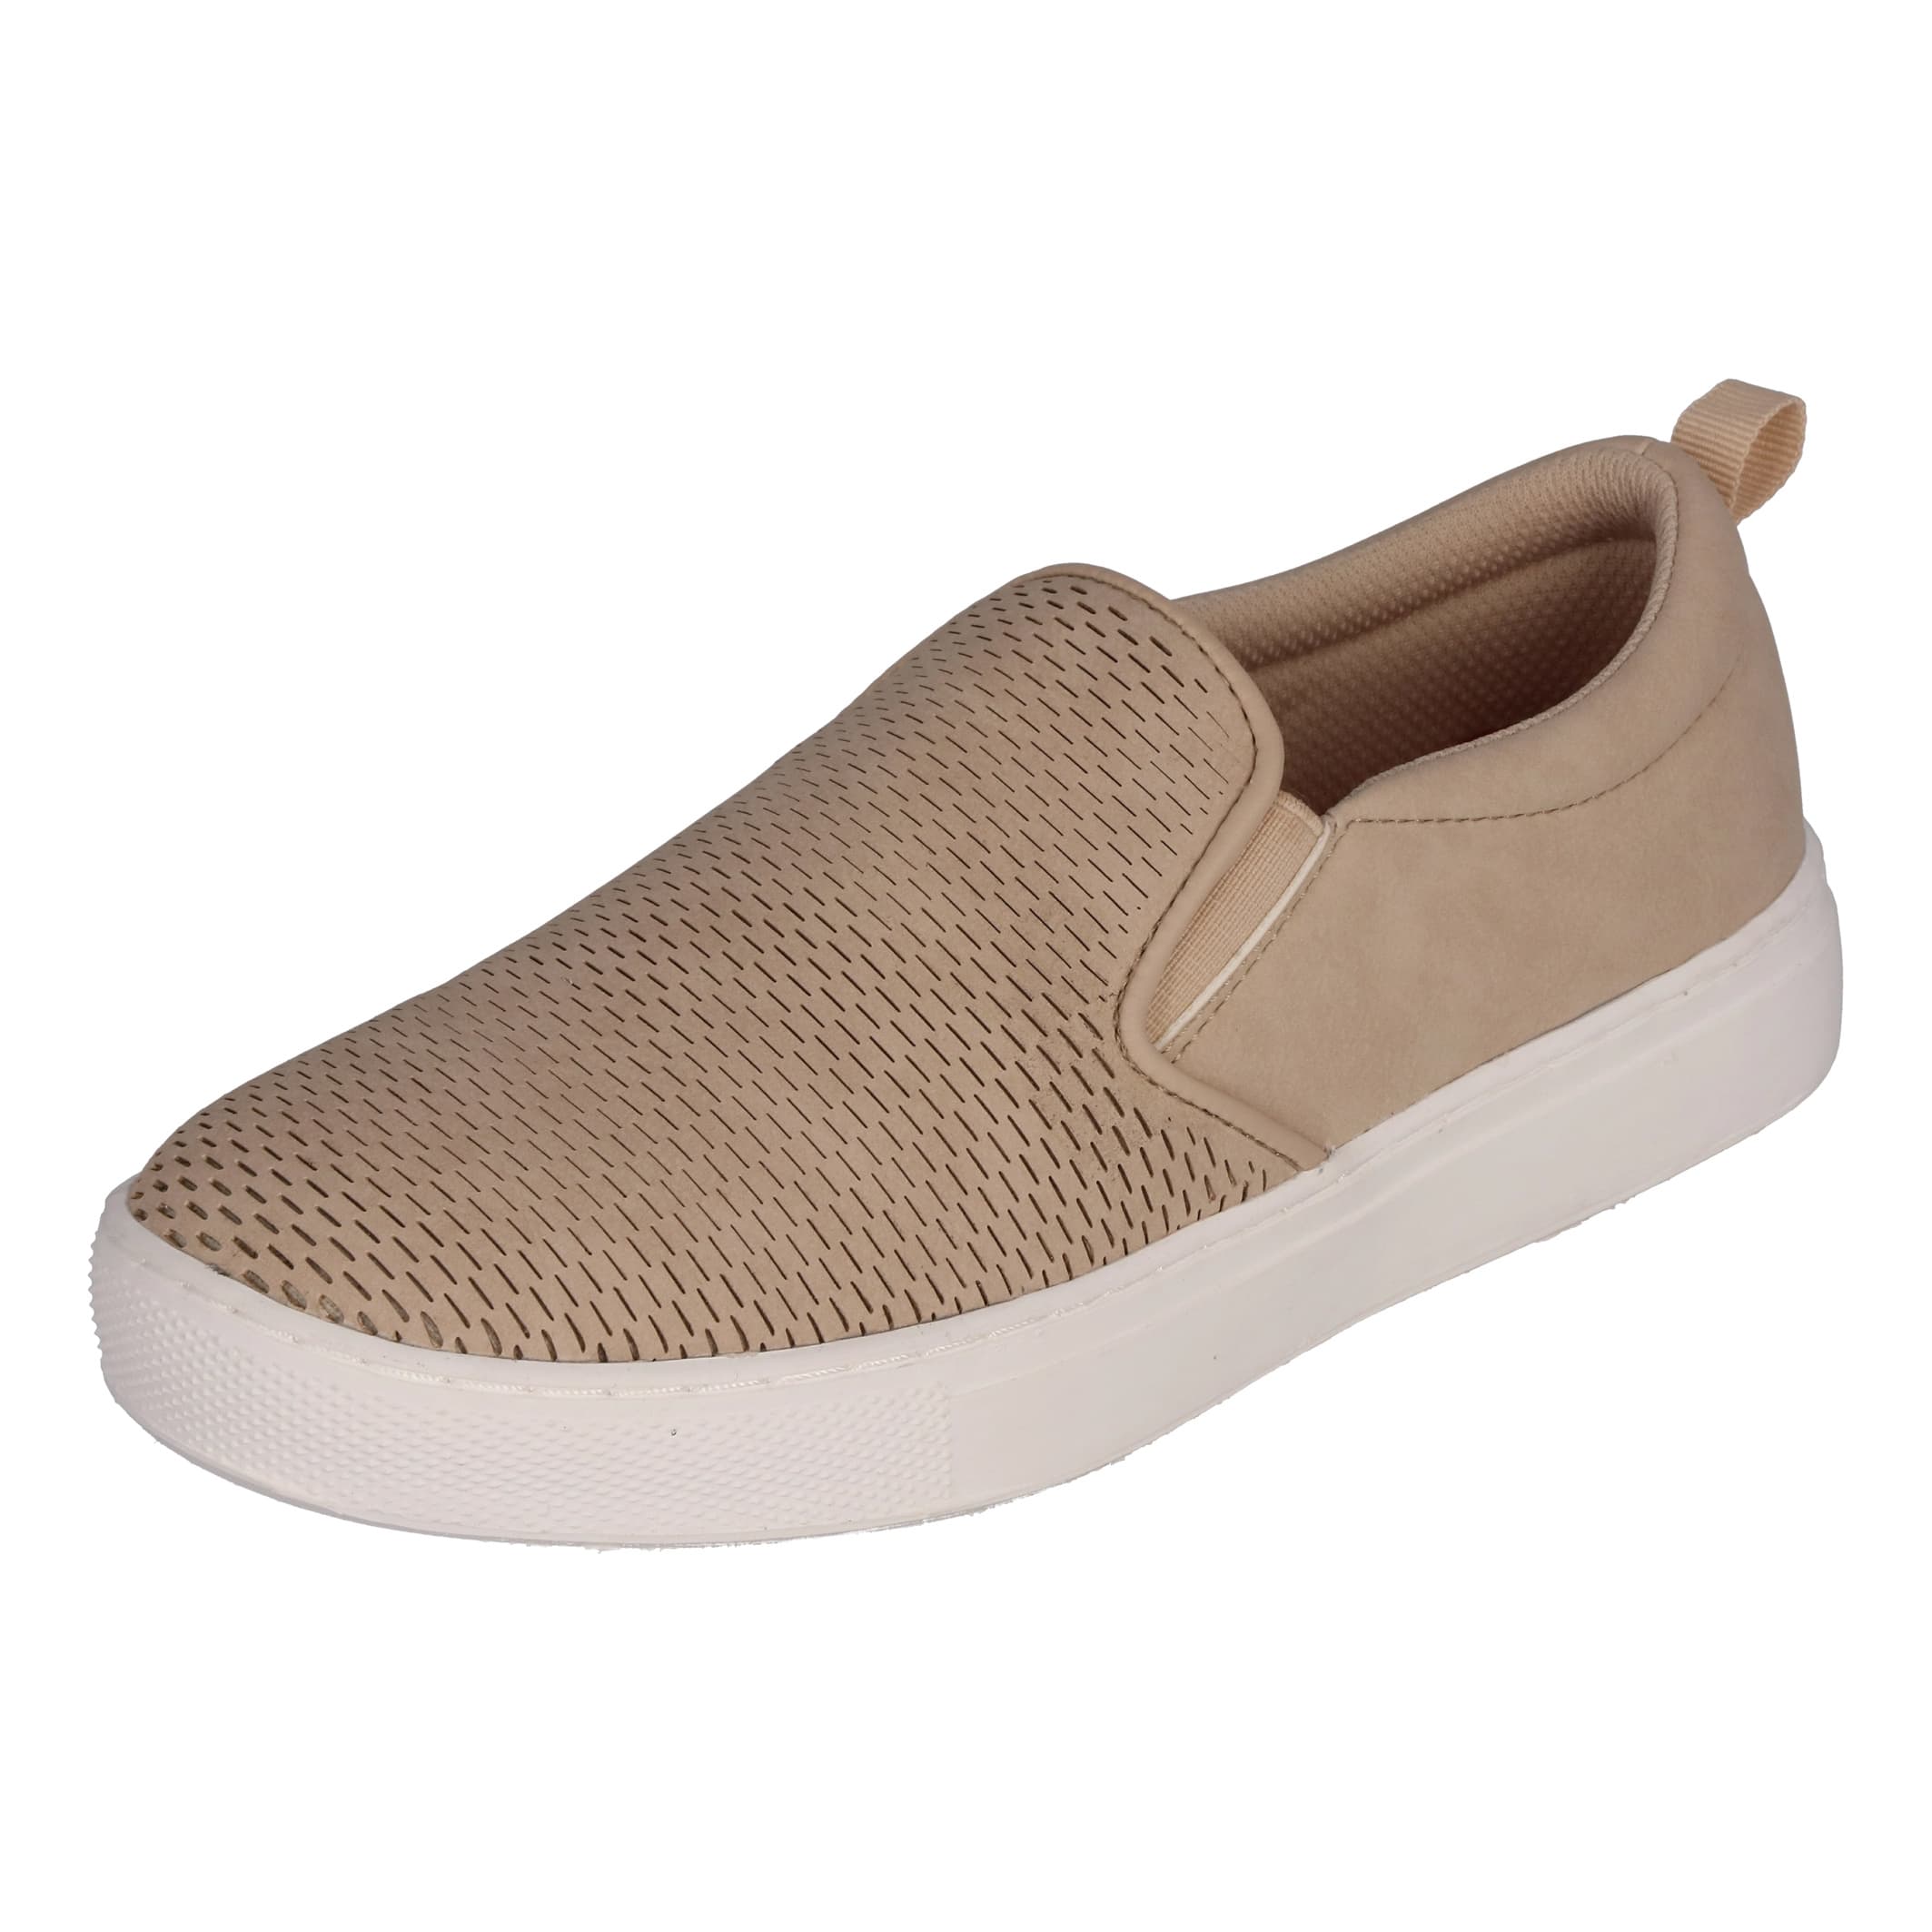 Natural Reflections® Women’s Perf Slip-On Shoes - Tan